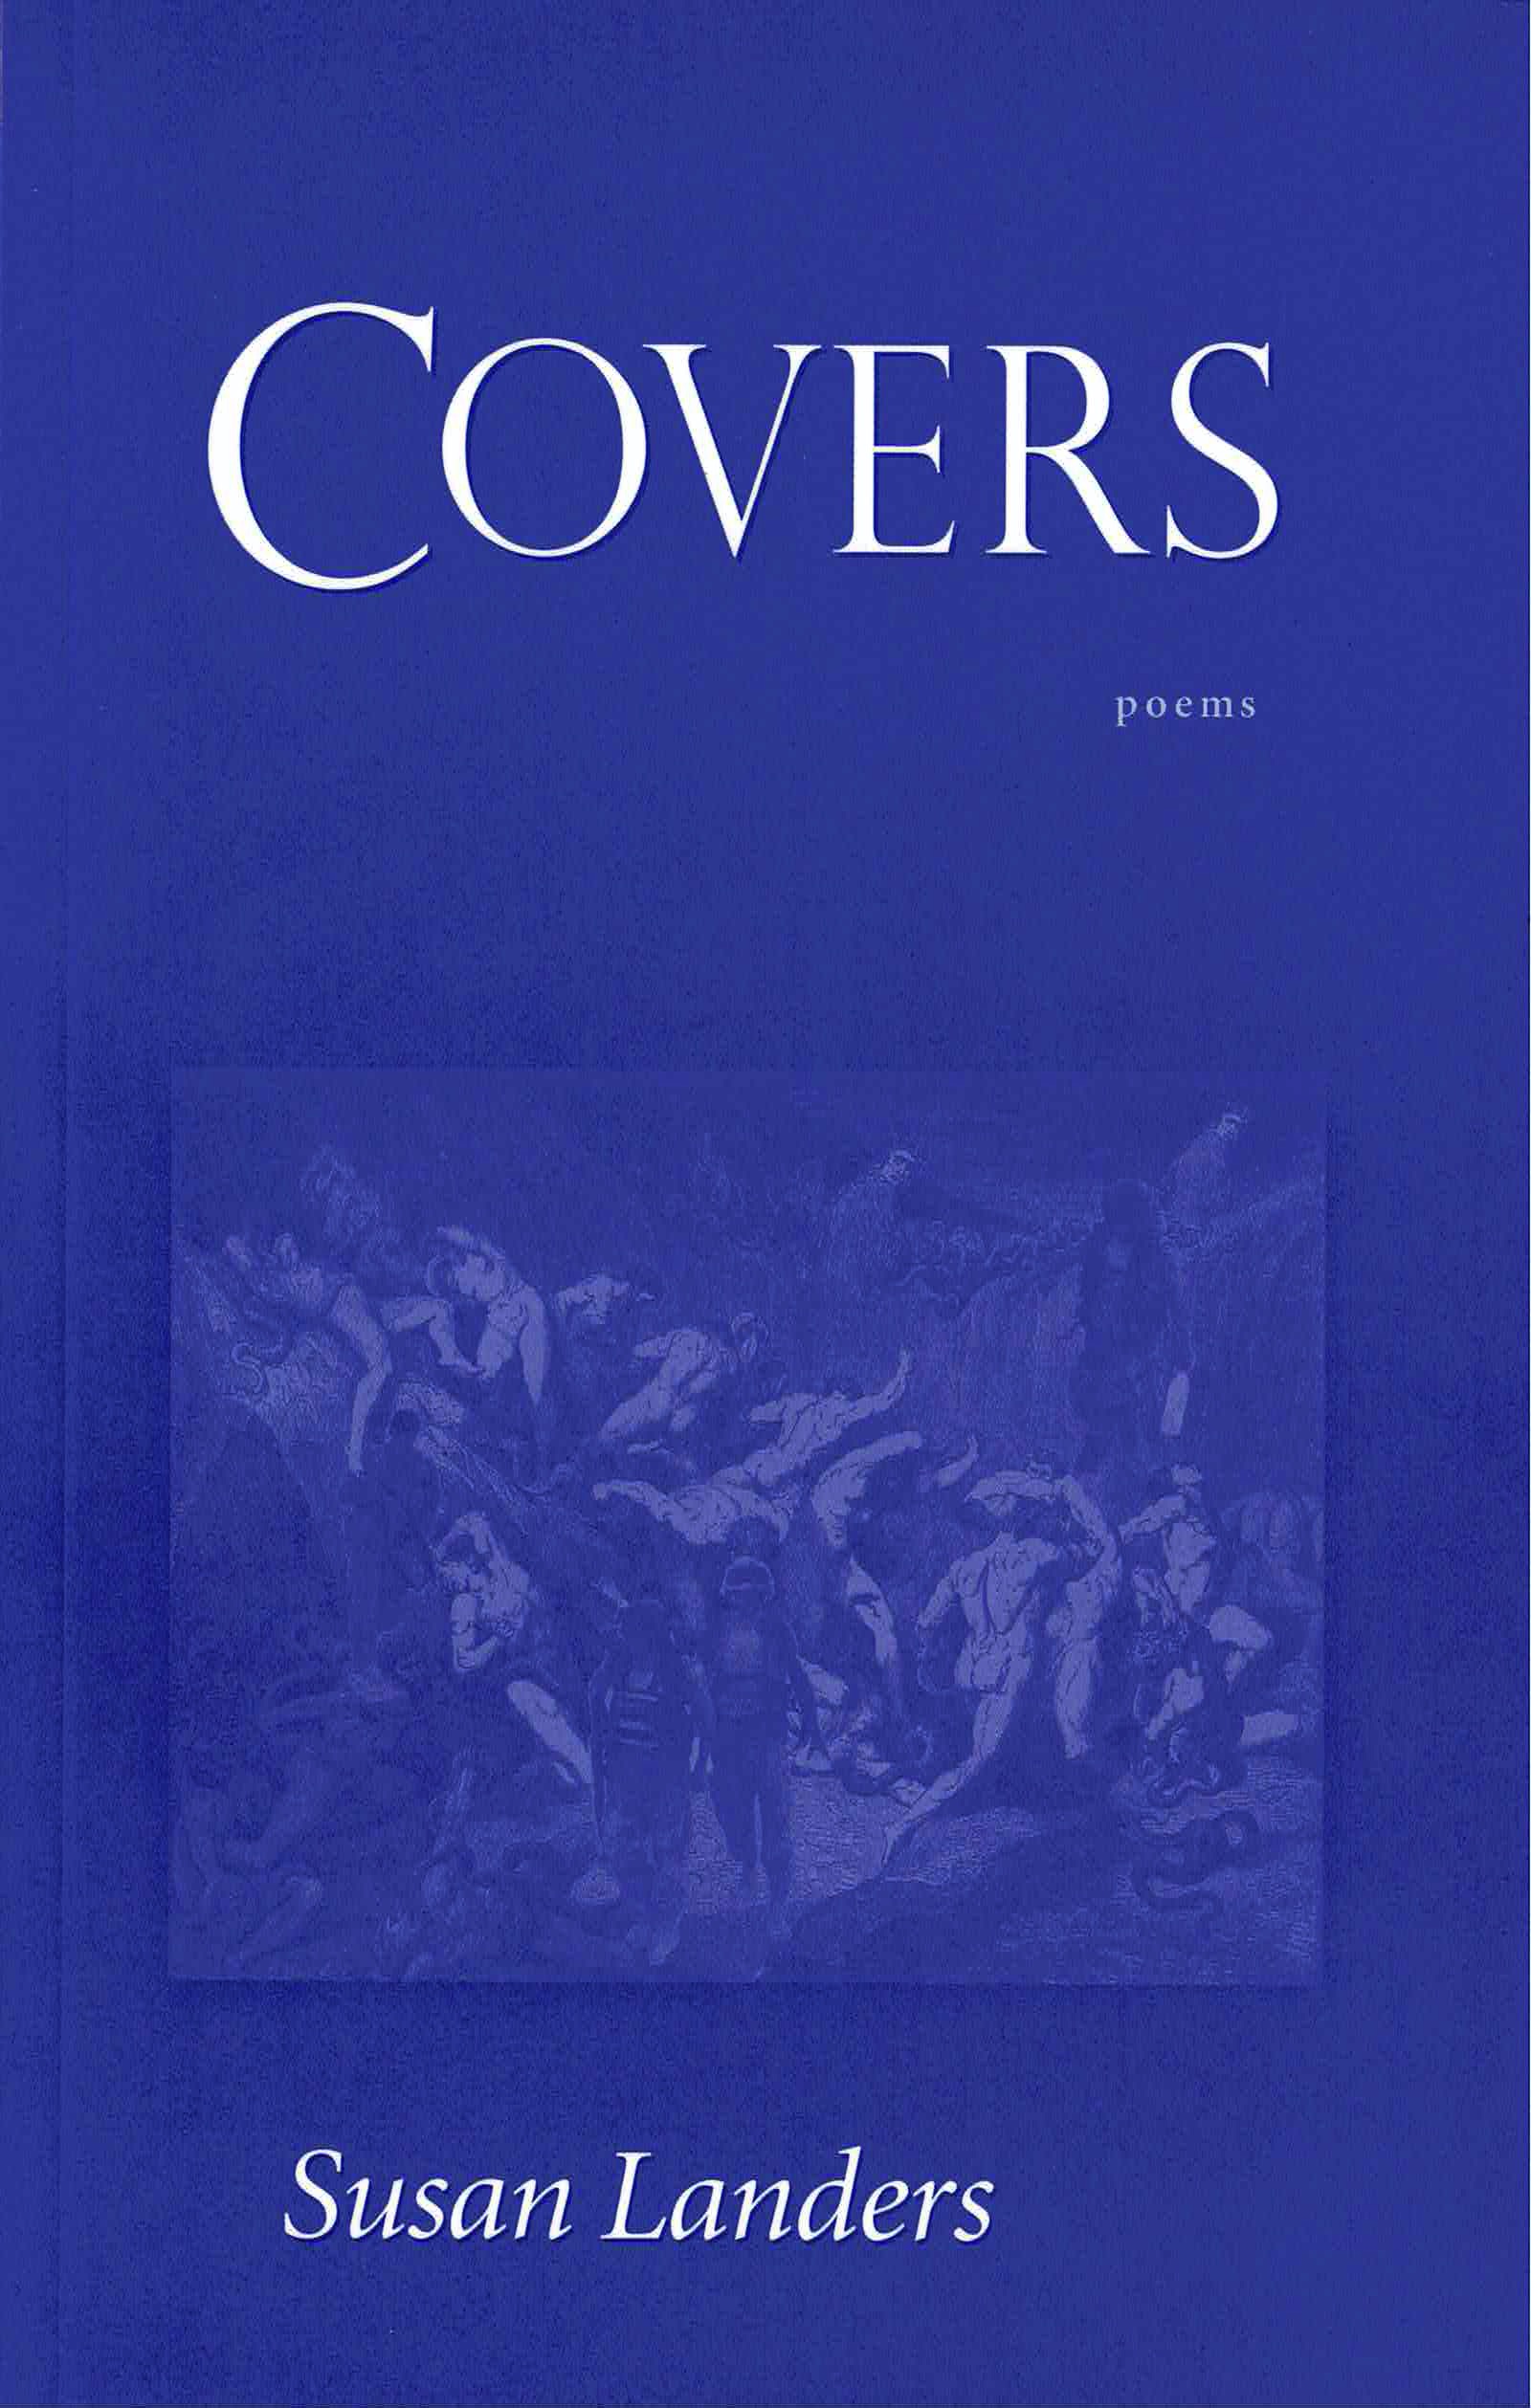 cover of Covers by Susan Landers; blue background, blue-tinted, faded panting of people in the nude strewn across the landscape